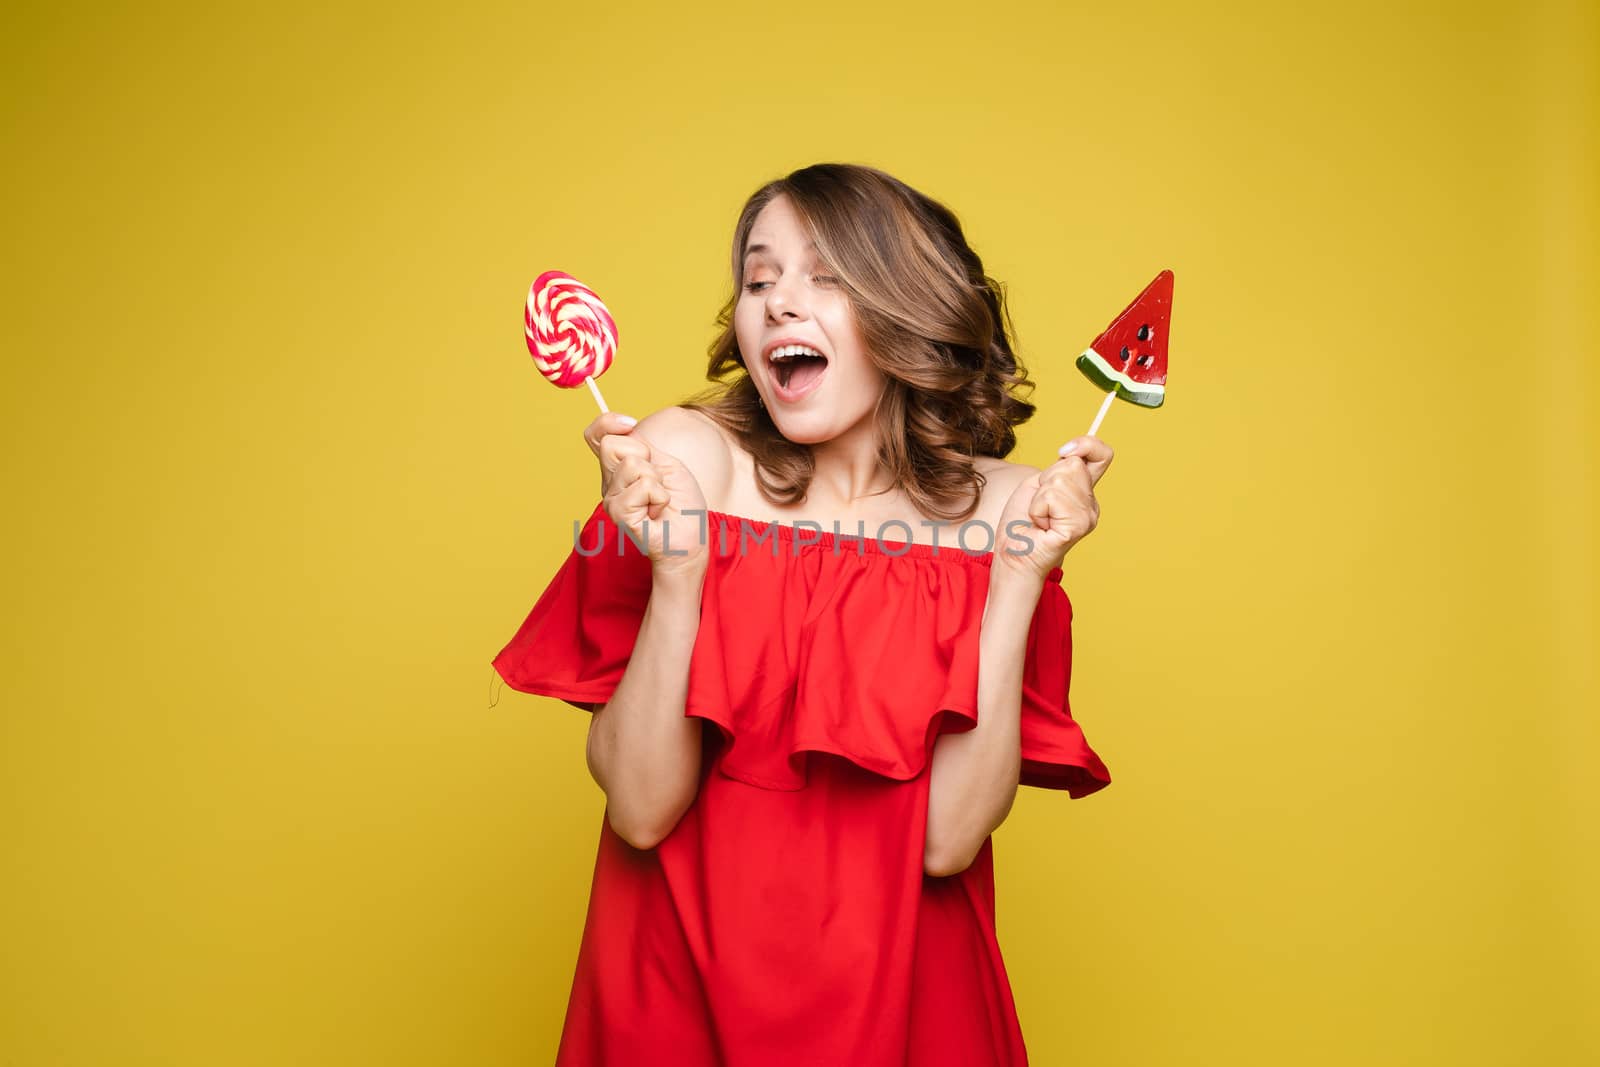 Close up portrait of attractive lovely girl in light dress handing lolipop isolated on yellow background